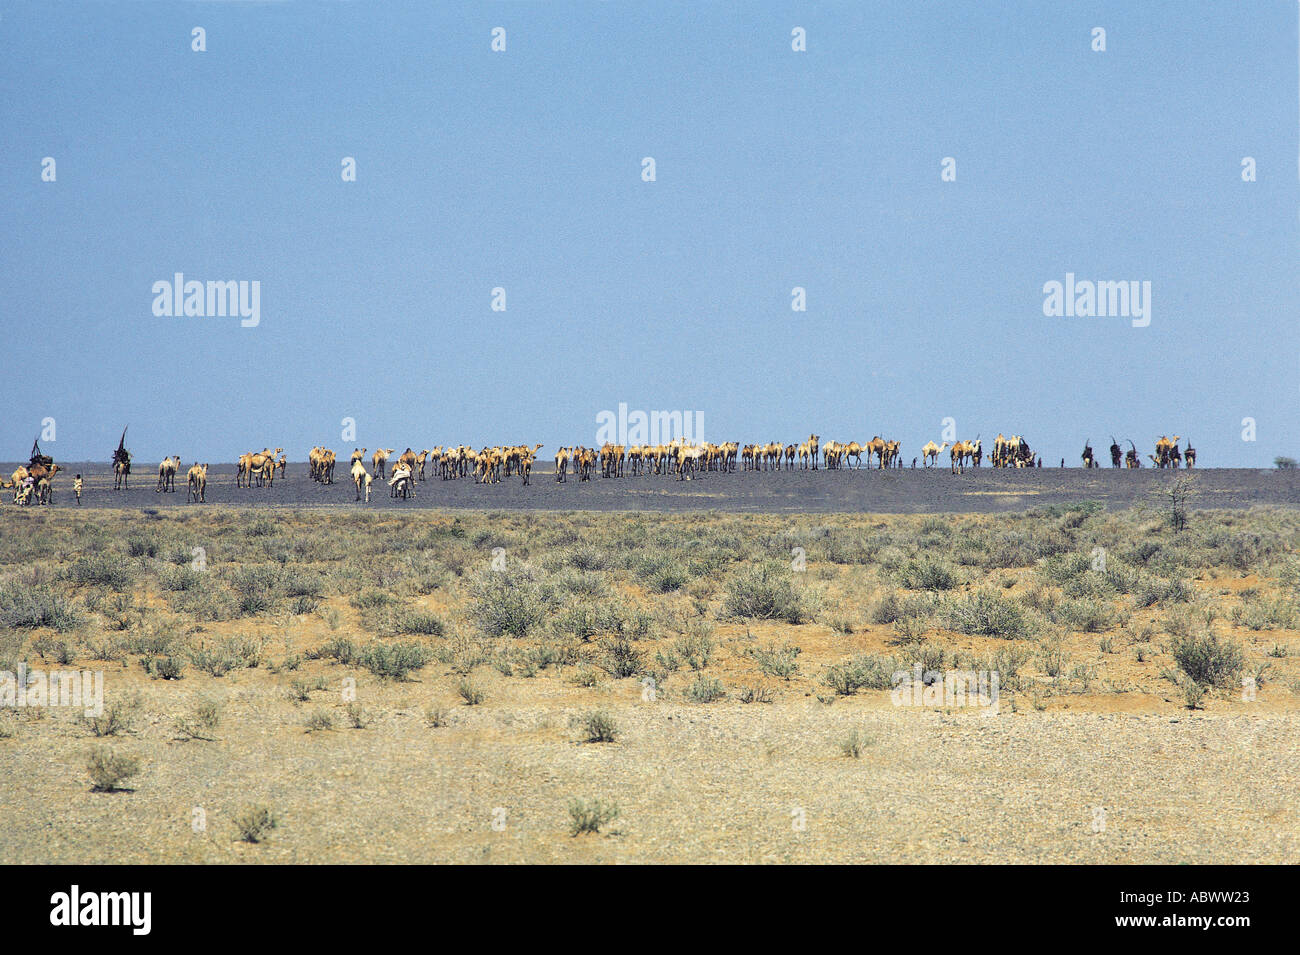 Gabbra people with their camels during migration Stock Photo